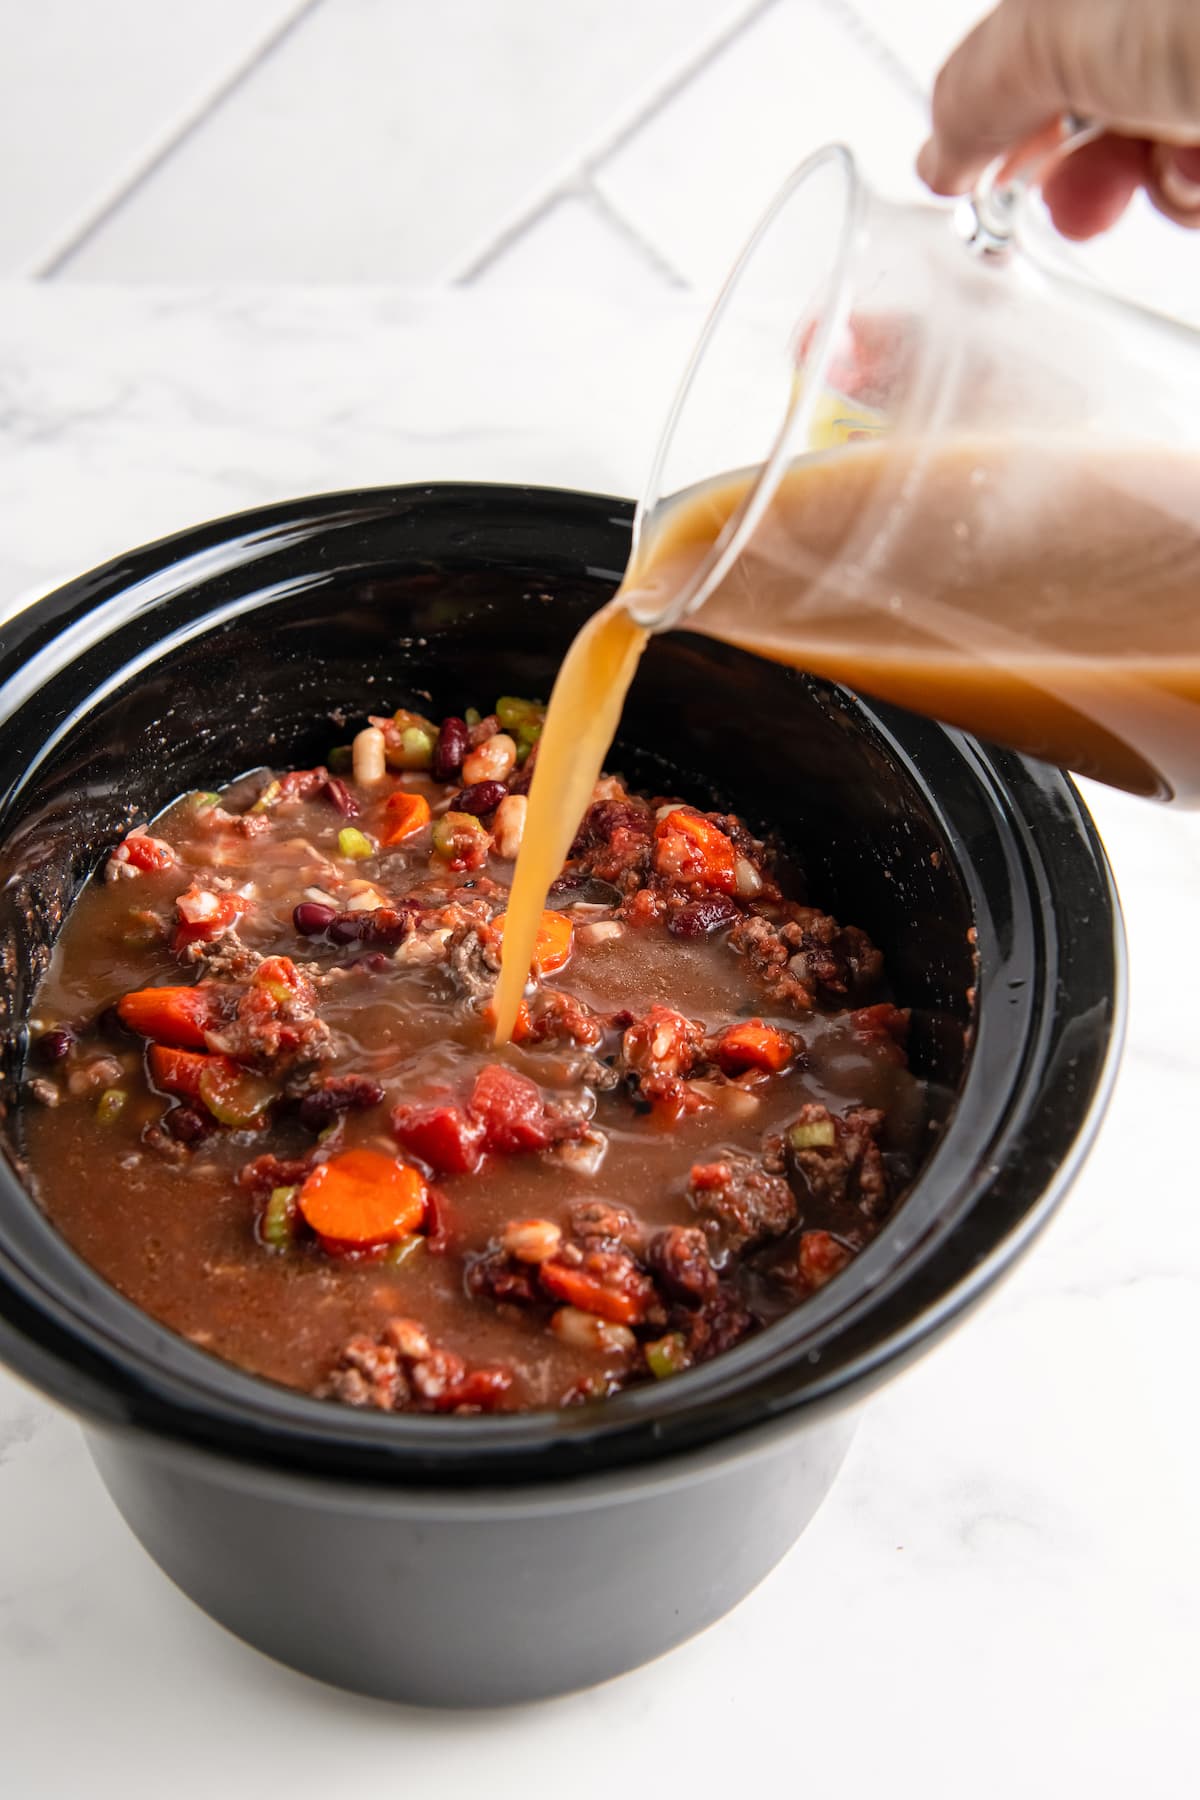 pouring beef broth into a crockpot with other soup ingredients